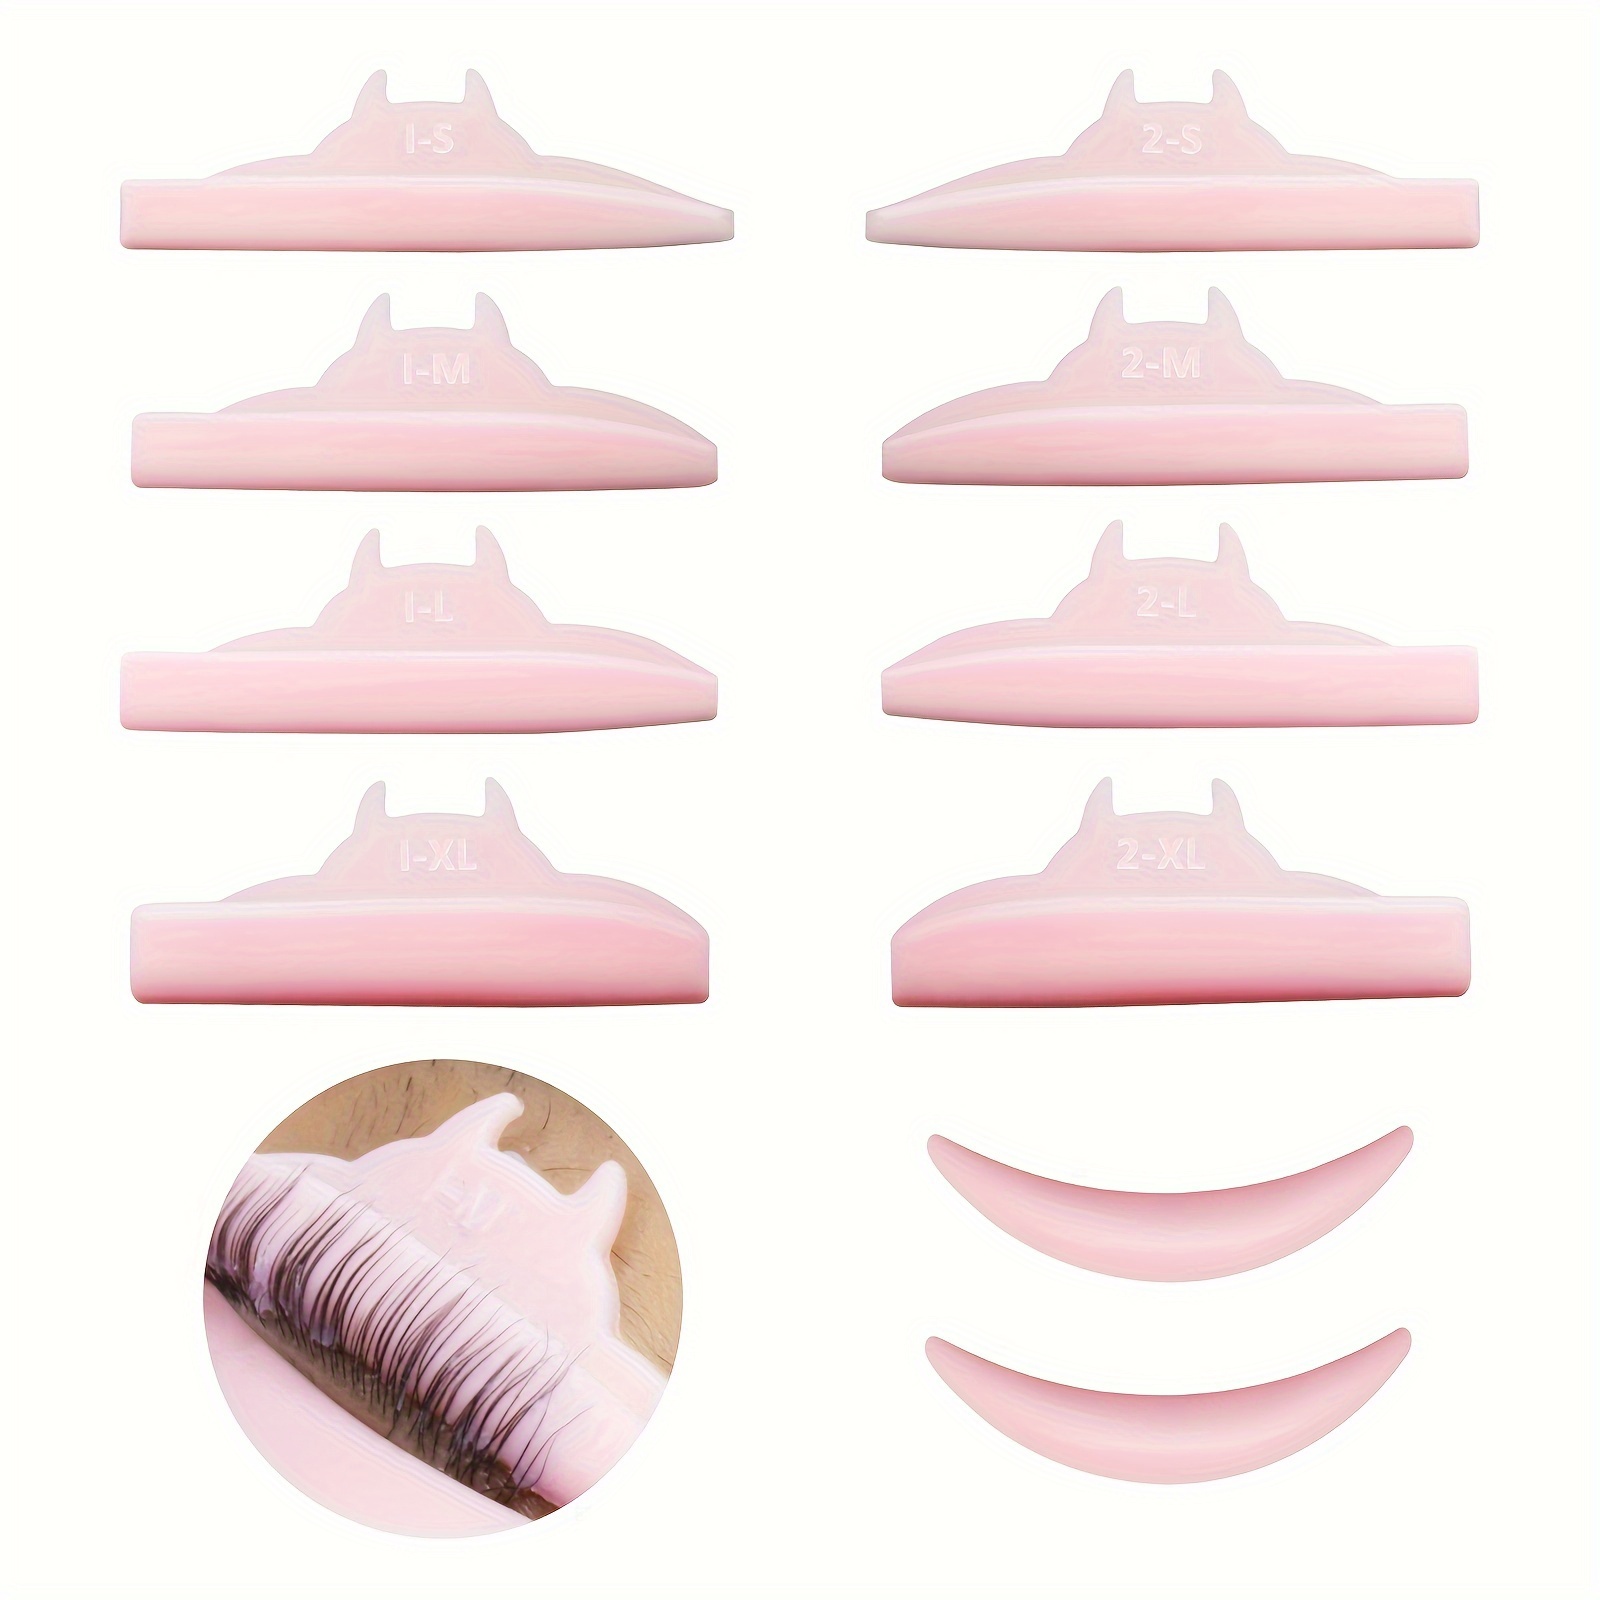  Libeauty Lash Lift Rods, Lash Lift Pads, Green Reusable  Eyelash Perming Curler Shield Pads, 5 Size 10 Pcs, with Premium PU Storage  Case for Perfect Lash Lifting : Beauty & Personal Care